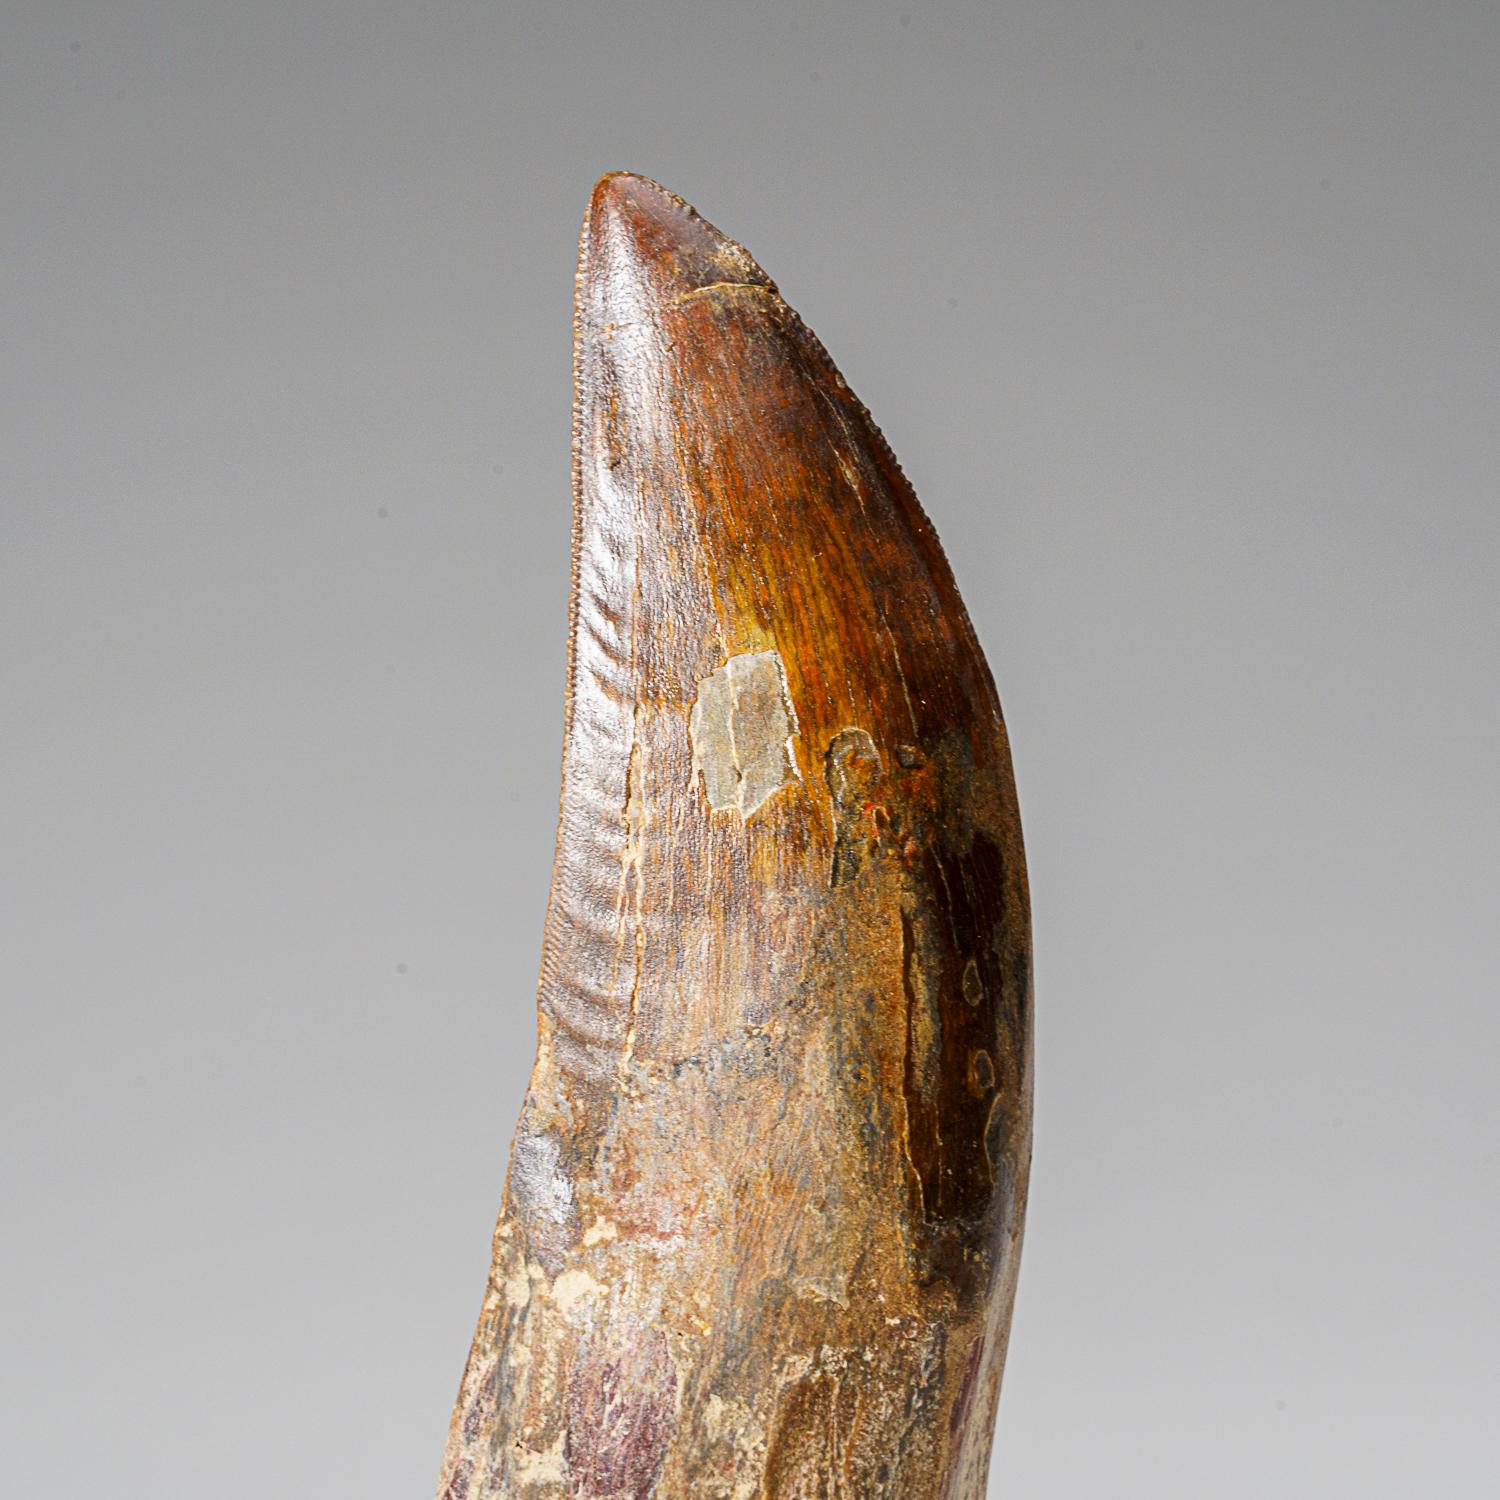 Carcharodontosaurus (Dinosaur) tooth in a glass display box From Tegana Formation, North Africa.

Cretaceous Age 65 million years

Carcharodontosaurus is one of the longest and heaviest known carnivorous dinosaurs, with various scientists proposing